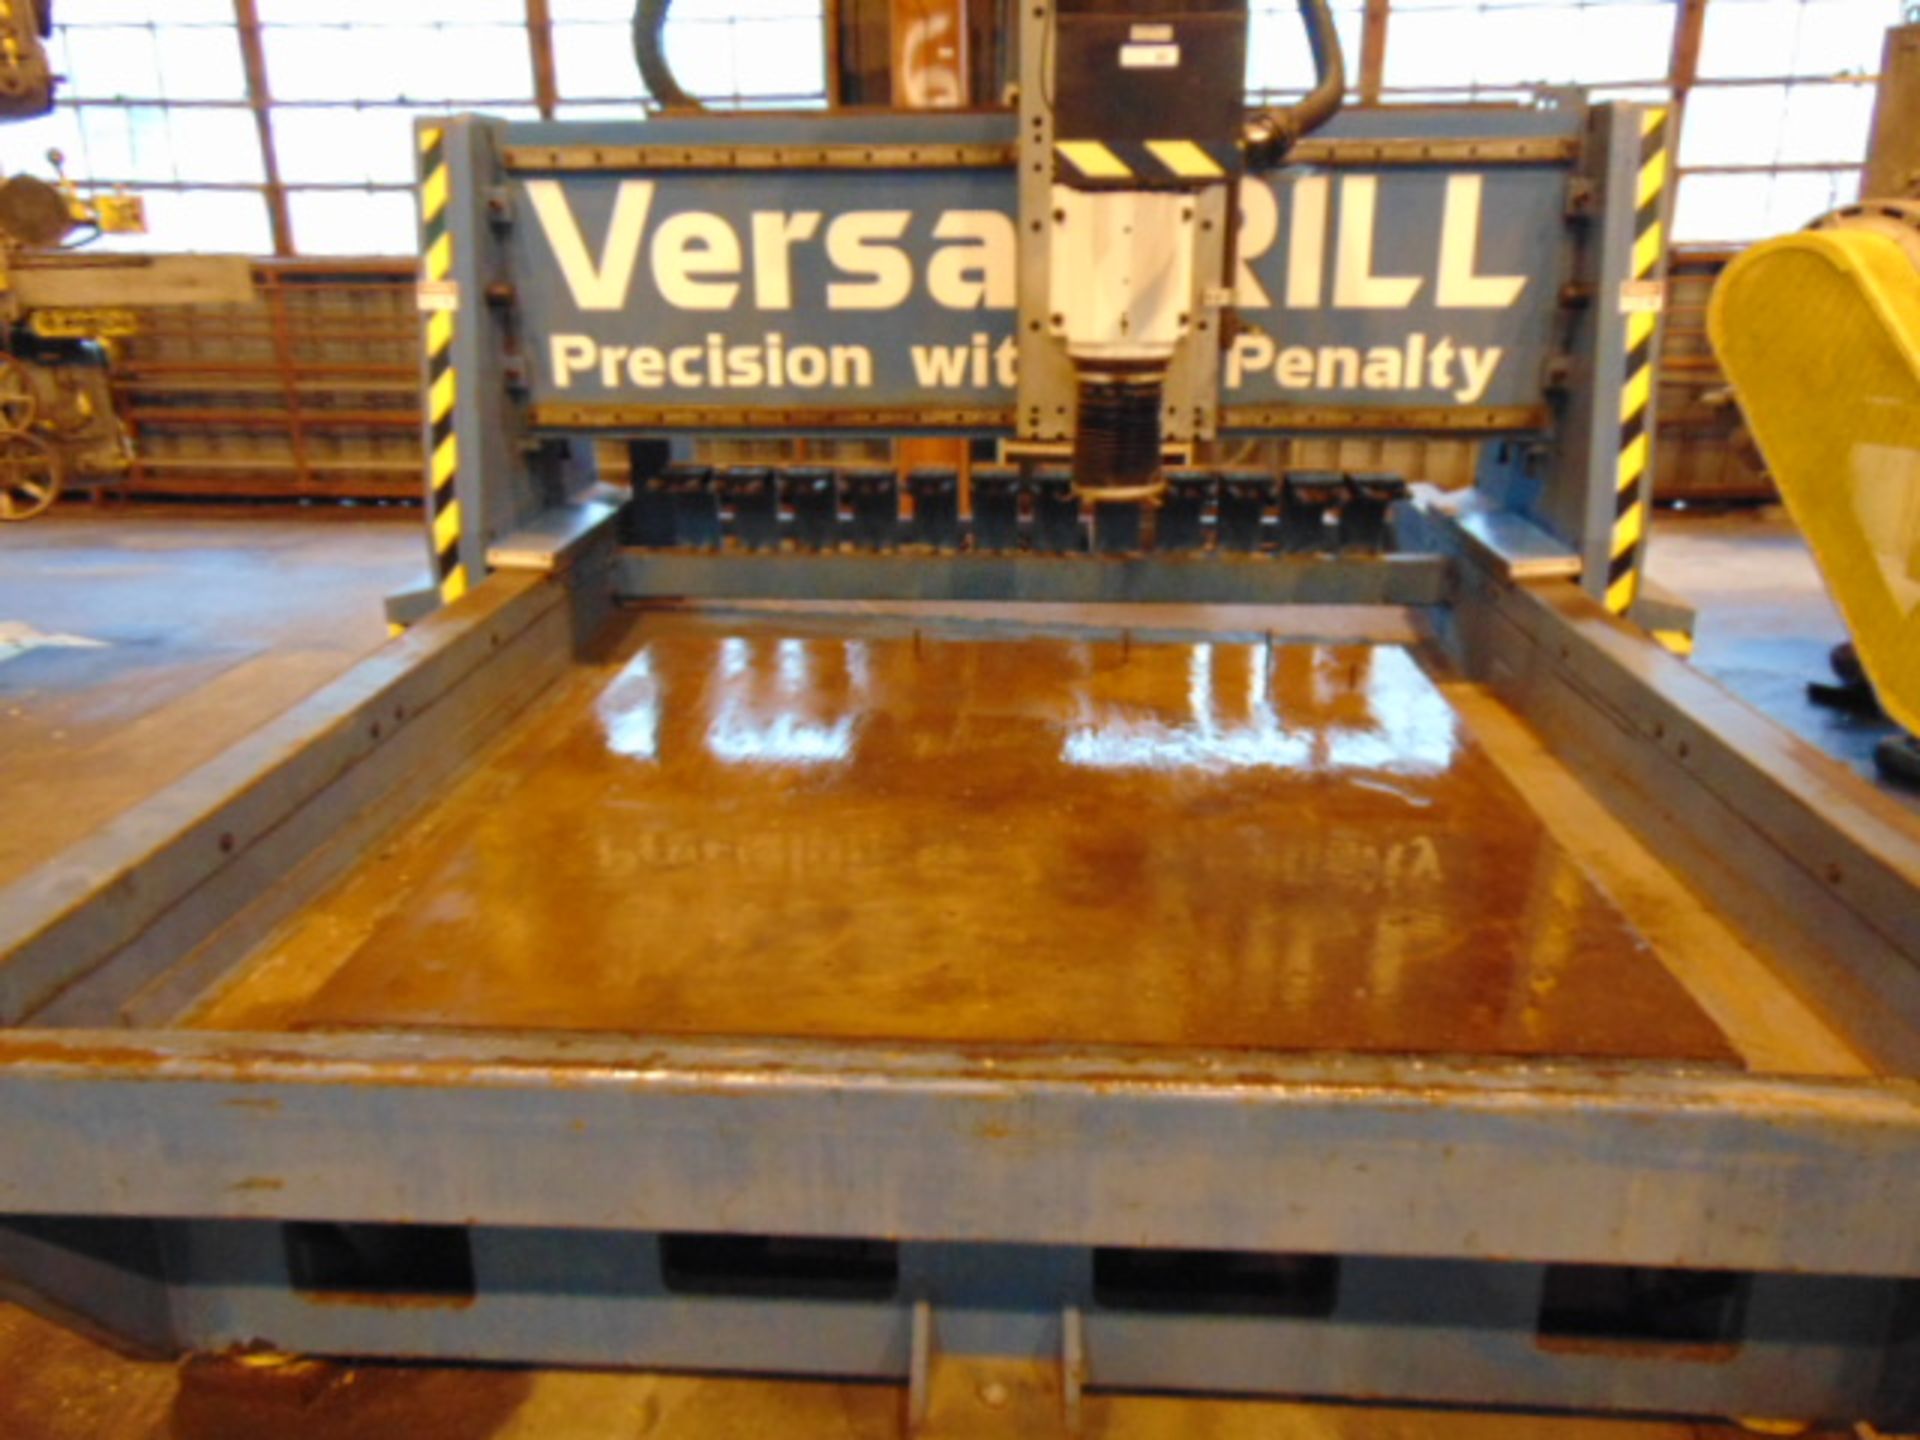 CNC TUBE SHEET DRILLING MACHINE, VERSADRILL MDL. HD-7272, new 2002, 72” X-axis travel, 72” Y-axis - Image 7 of 7